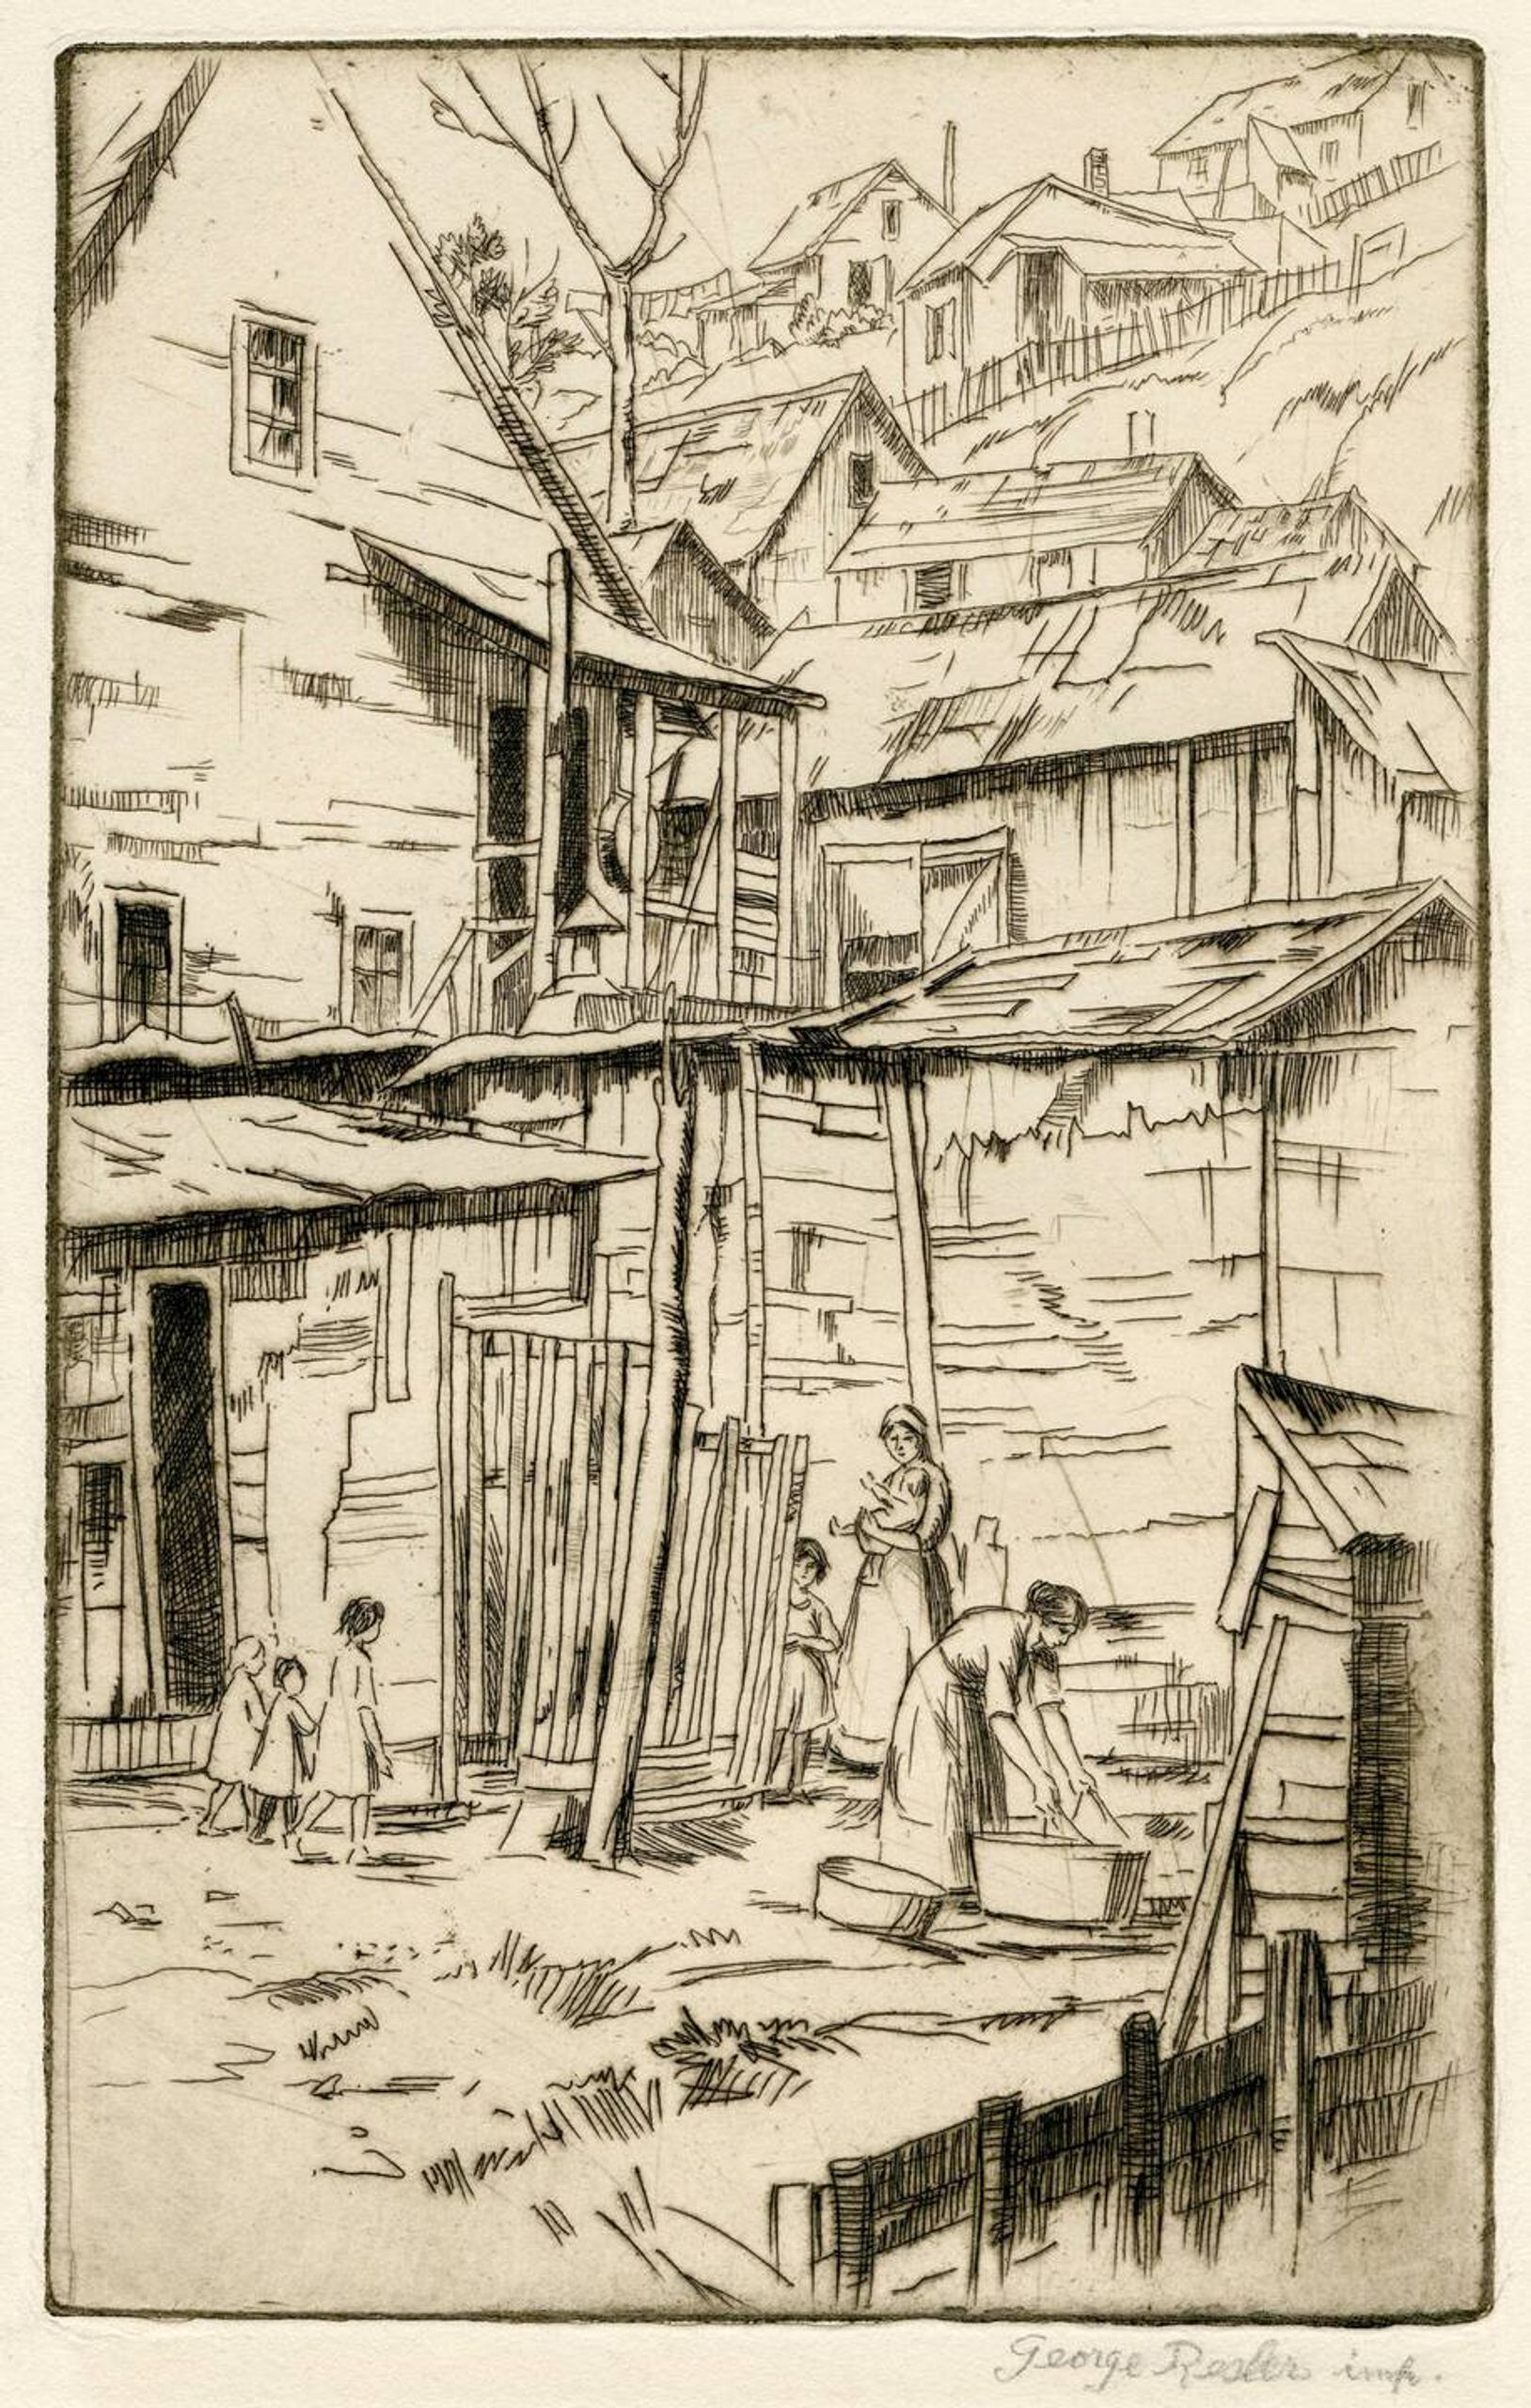 Sketch of houses in the valley of Swede Hollow. Women doing laundry outside, children helping.